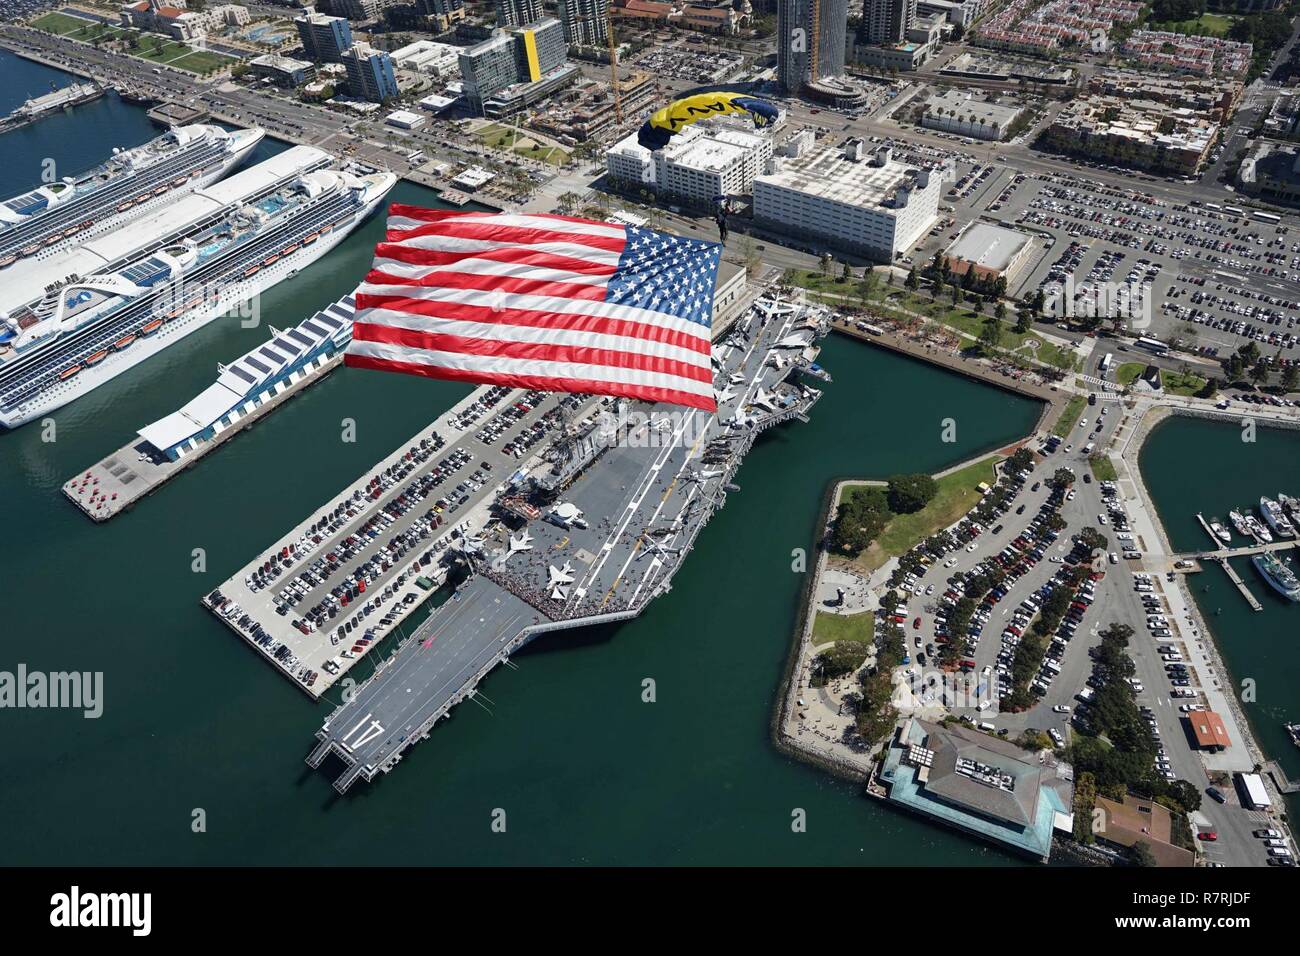 SAN DIEGO (March 29, 2017) Special Operator 1st Class T.J. Amdahl, assigned to the U.S. Navy parachute demonstration team, the Leap Frogs, flies the Star-Spangled Banner during a training demonstration above the USS Midway Museum. The Leap Frogs are based in San Diego and perform aerial parachute demonstrations around the nation in support of Naval Special Warfare and Navy recruiting. Stock Photo